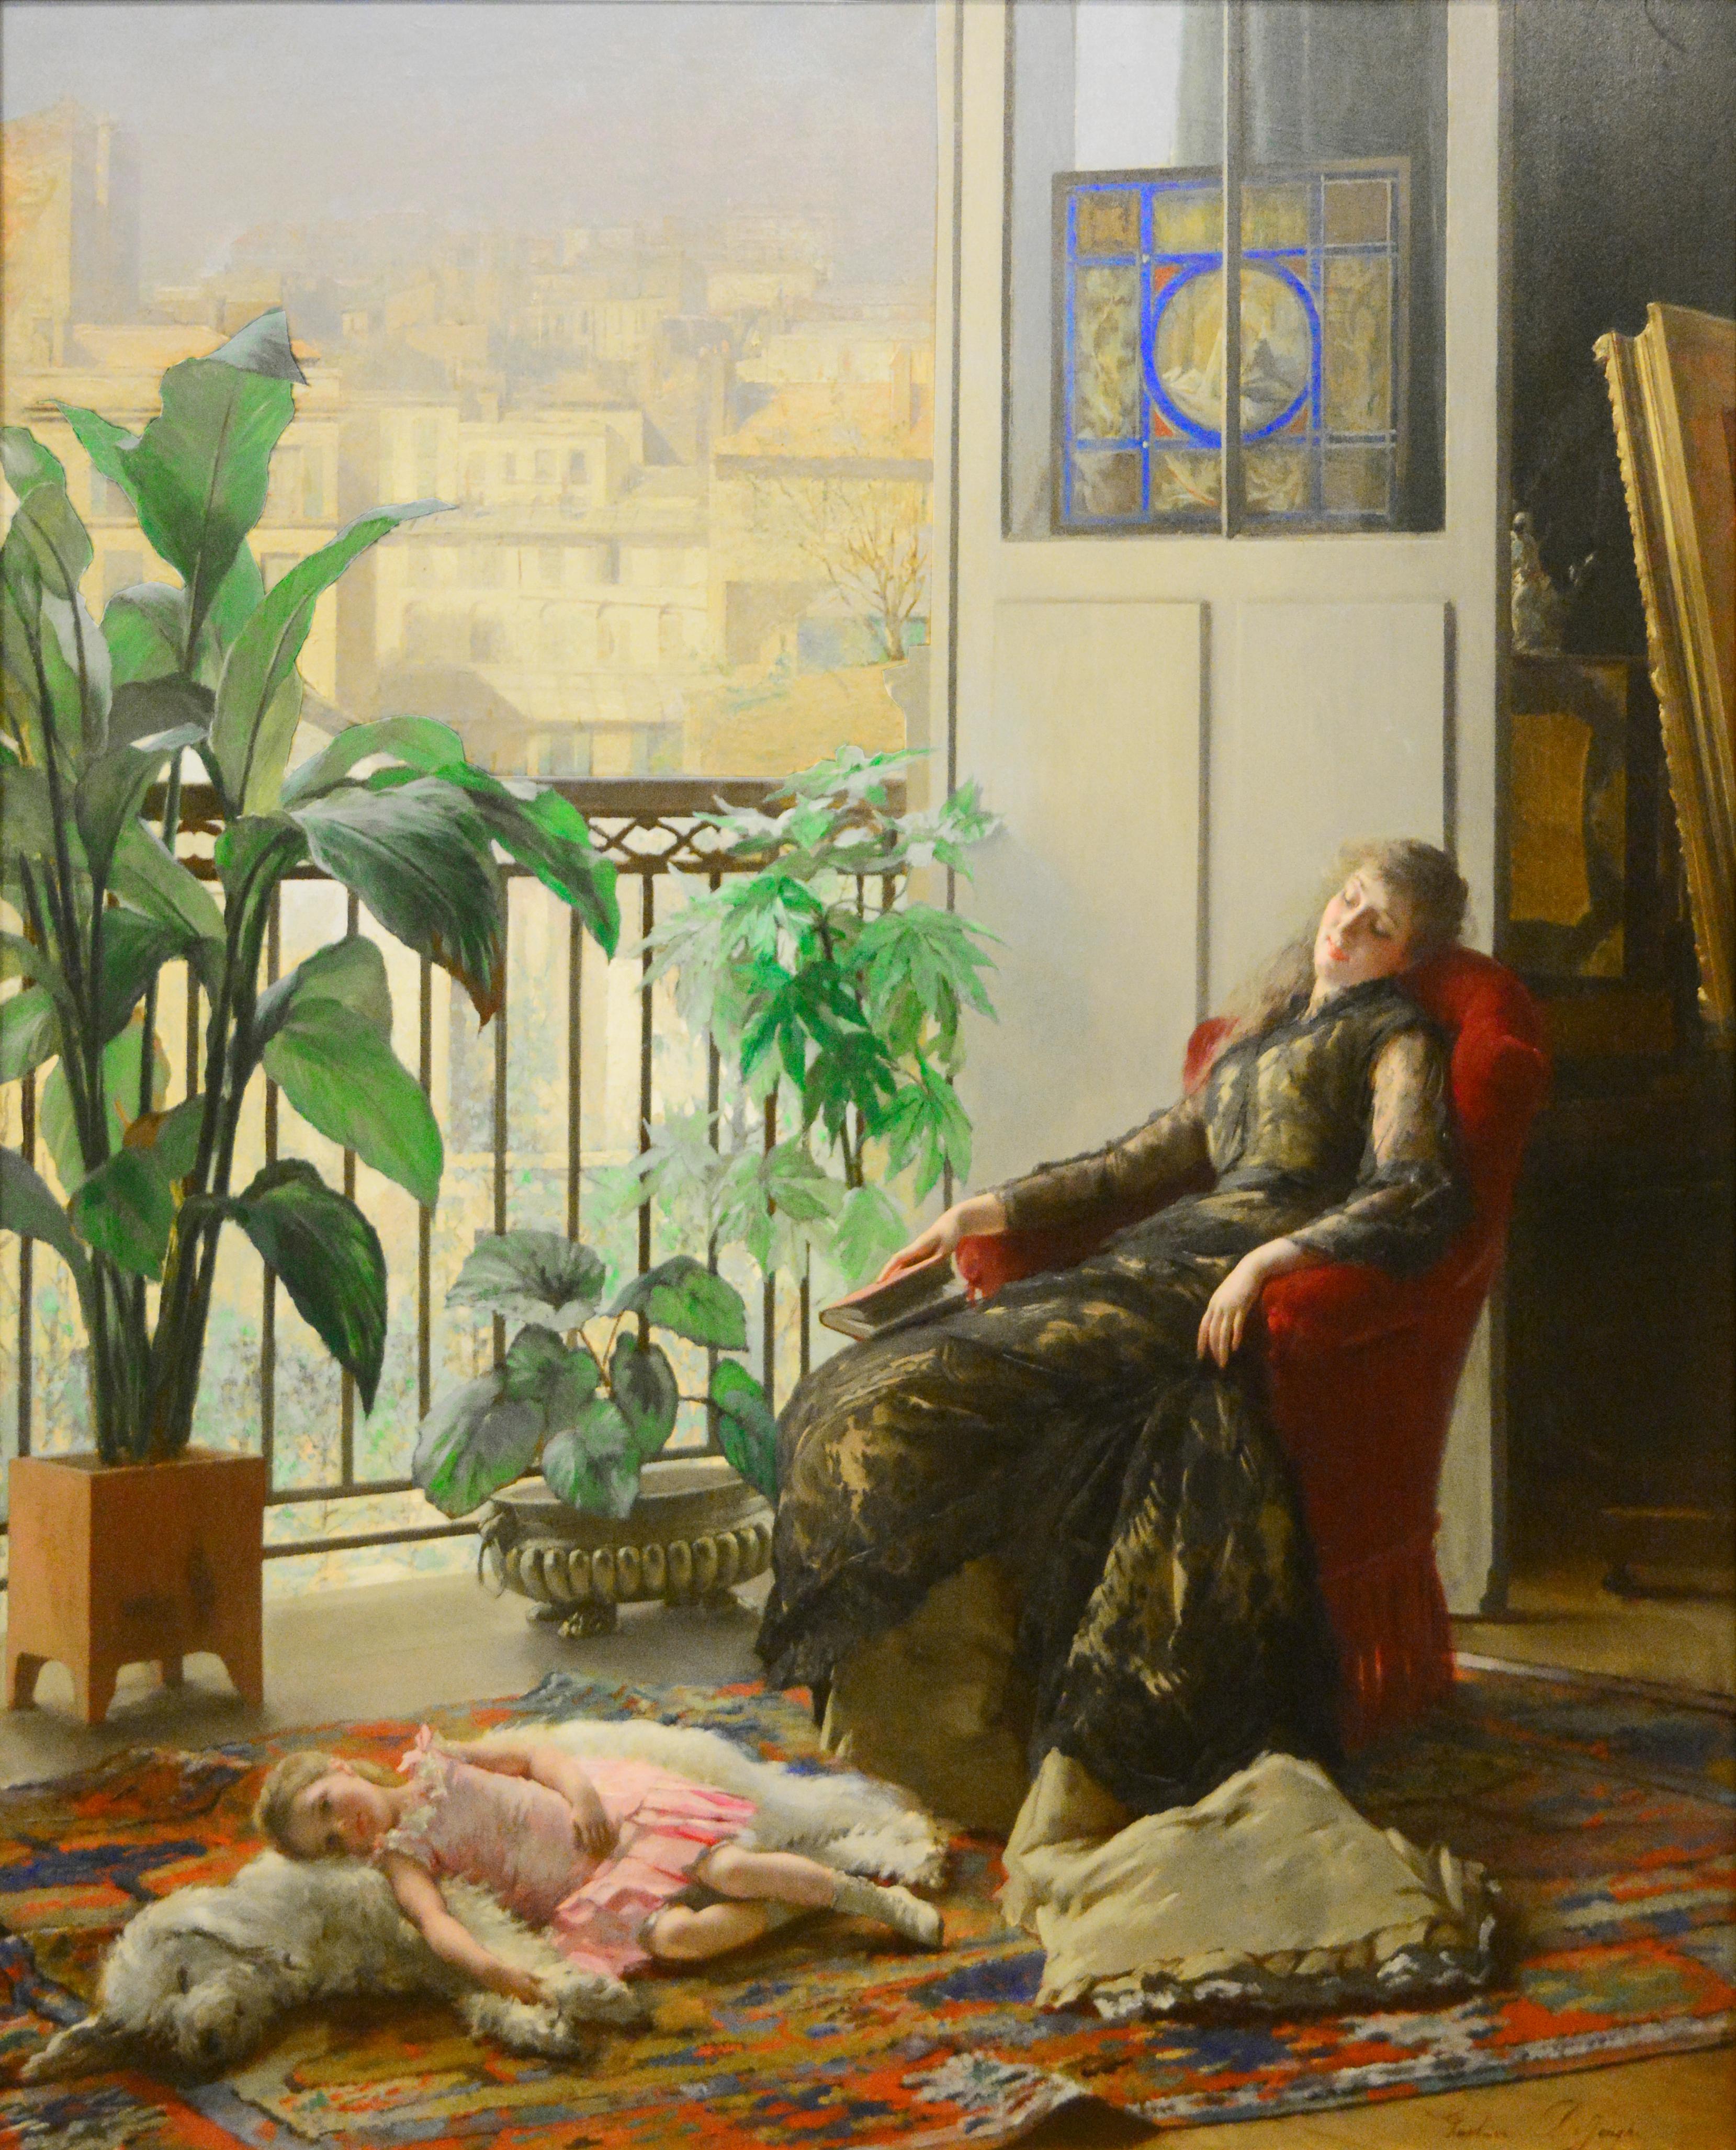 Gustave Léonhard de Jonghe Interior Painting - Academic portrait of a woman with child and dog titled, "Afternoon Repose"